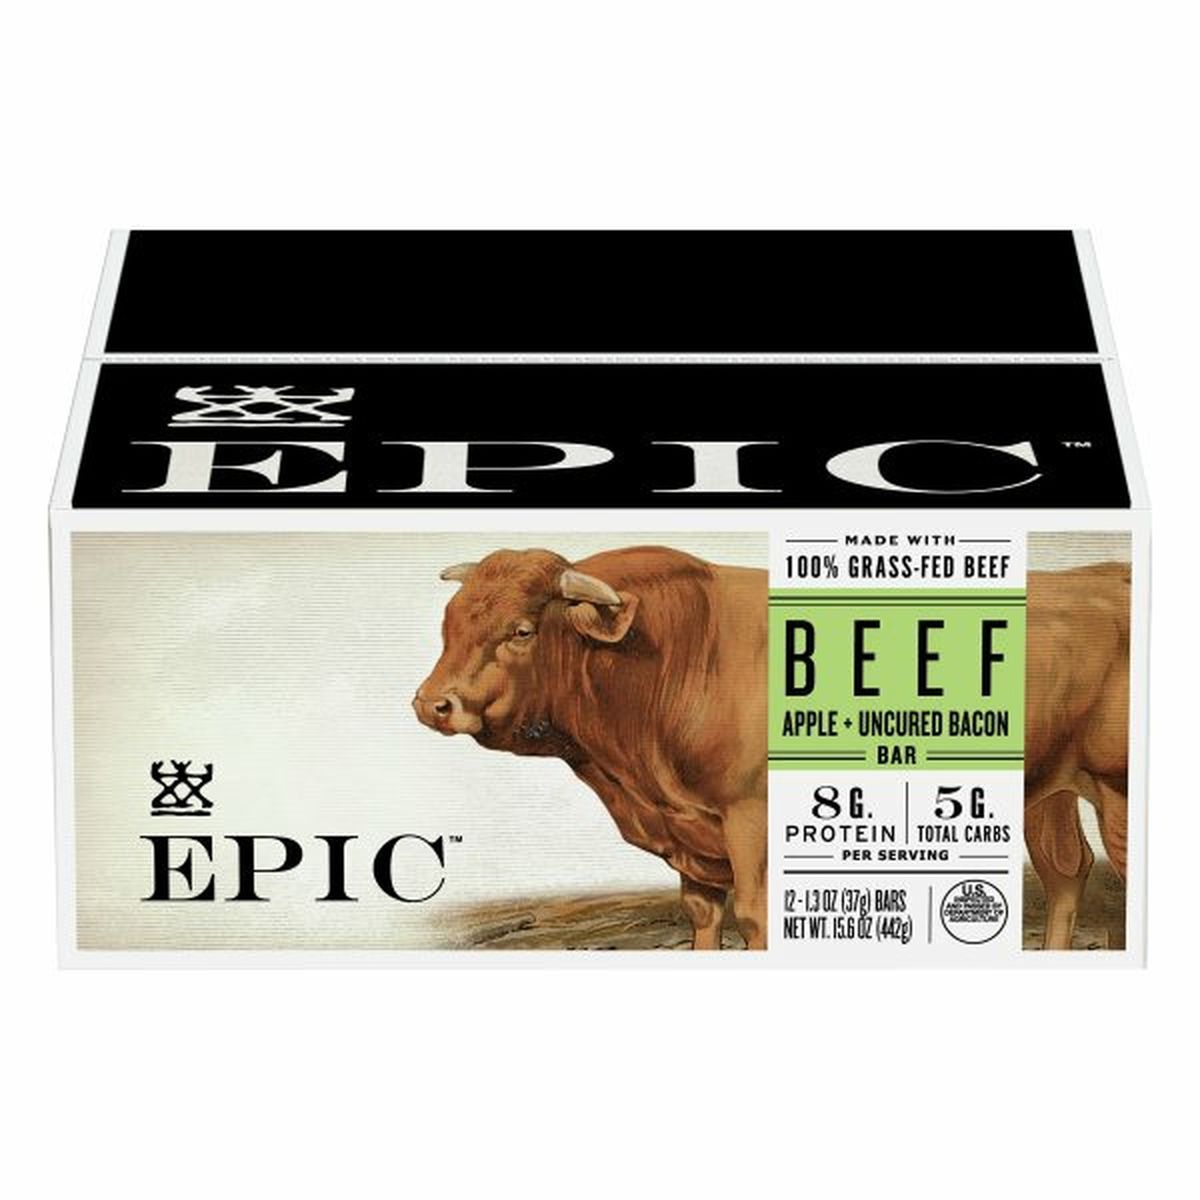 Calories in Epic Beef Beef Bars, Apple+Uncured Bacon